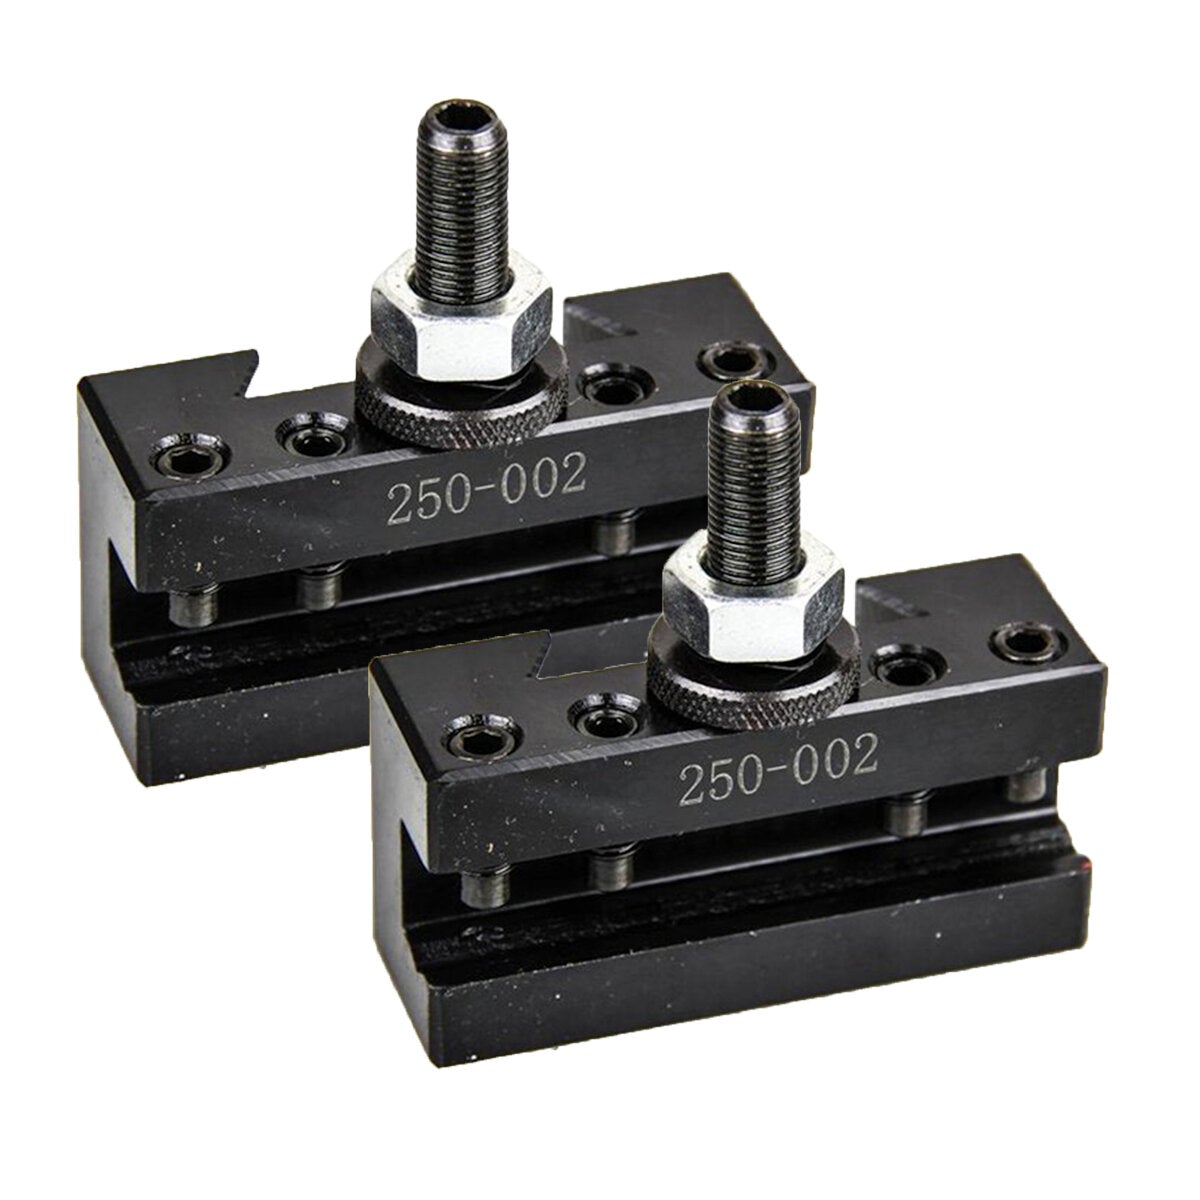 2-Piece Set Of Machifit  Wedge Main Body Tool Holder Exclusively For 250-100/250-111 Tool Holder Body